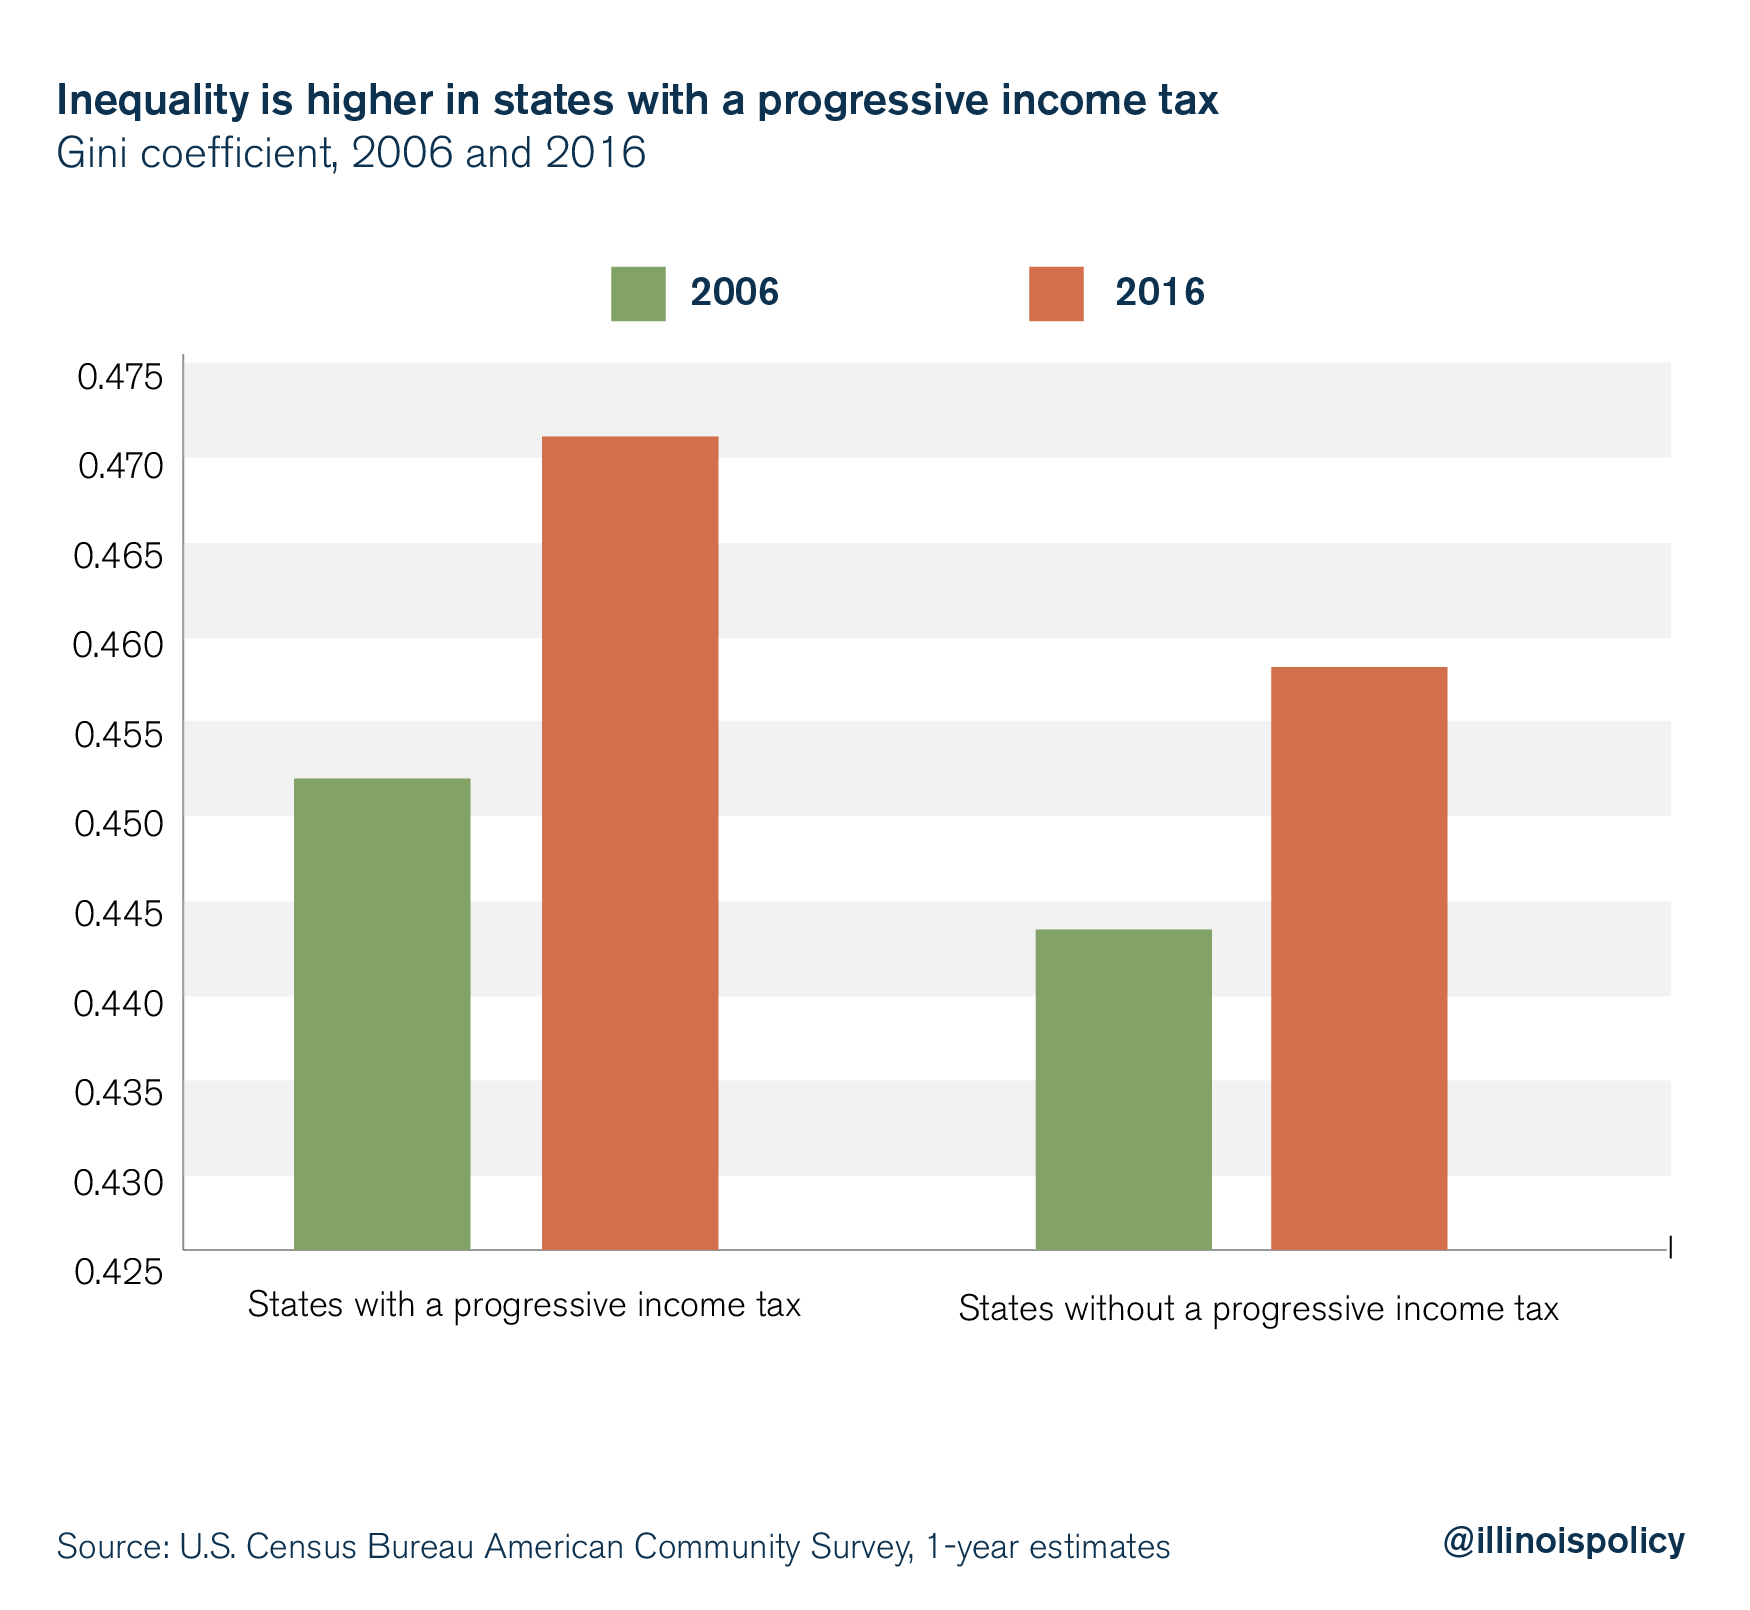 Inequality is higher in states with a progressive income tax